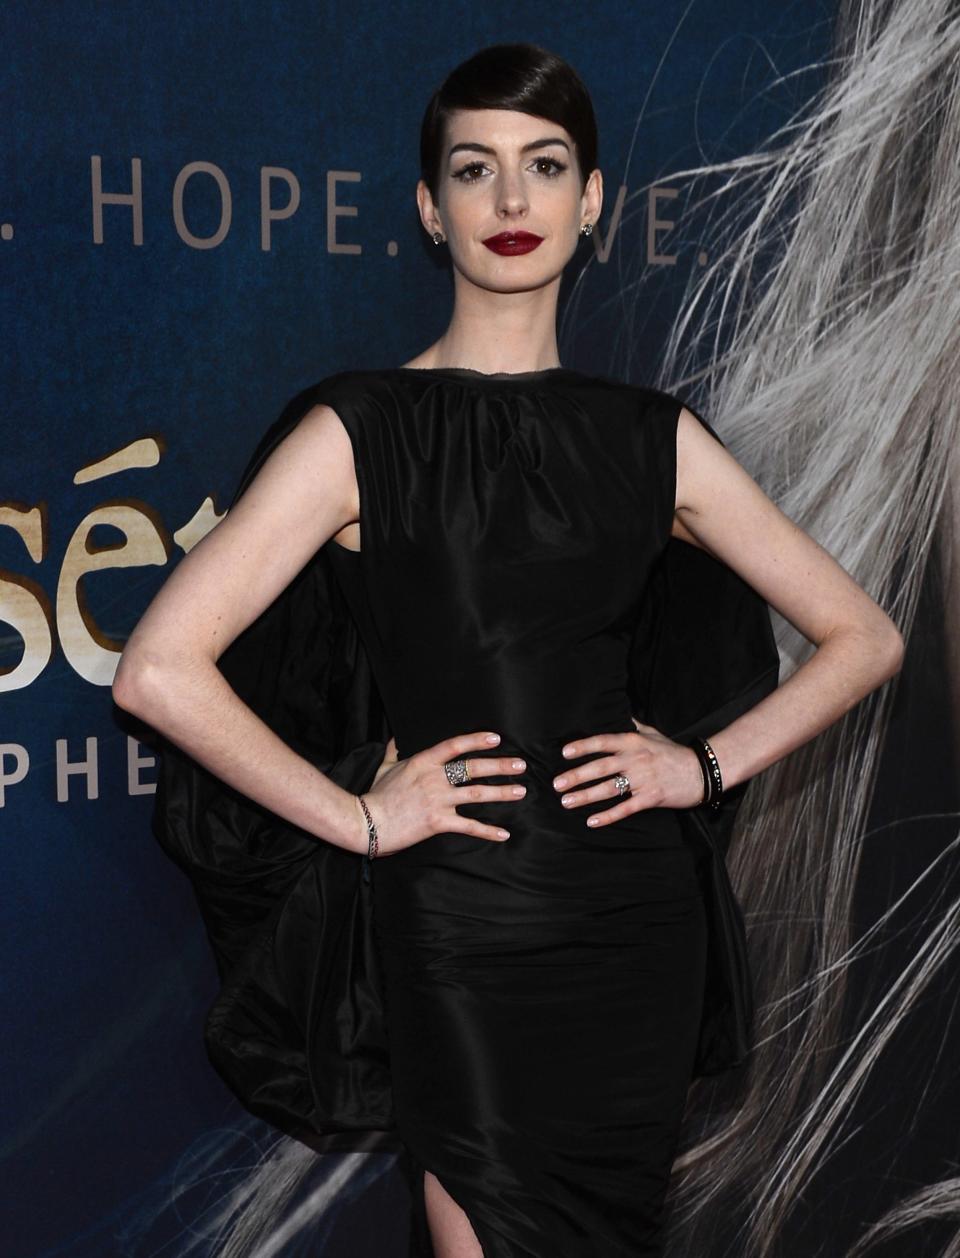 NEW YORK, NY - DECEMBER 10: Anne Hathaway attends the "Les Miserables" New York premiere at Ziegfeld Theatre on December 10, 2012 in New York City. (Photo by Larry Busacca/Getty Images)